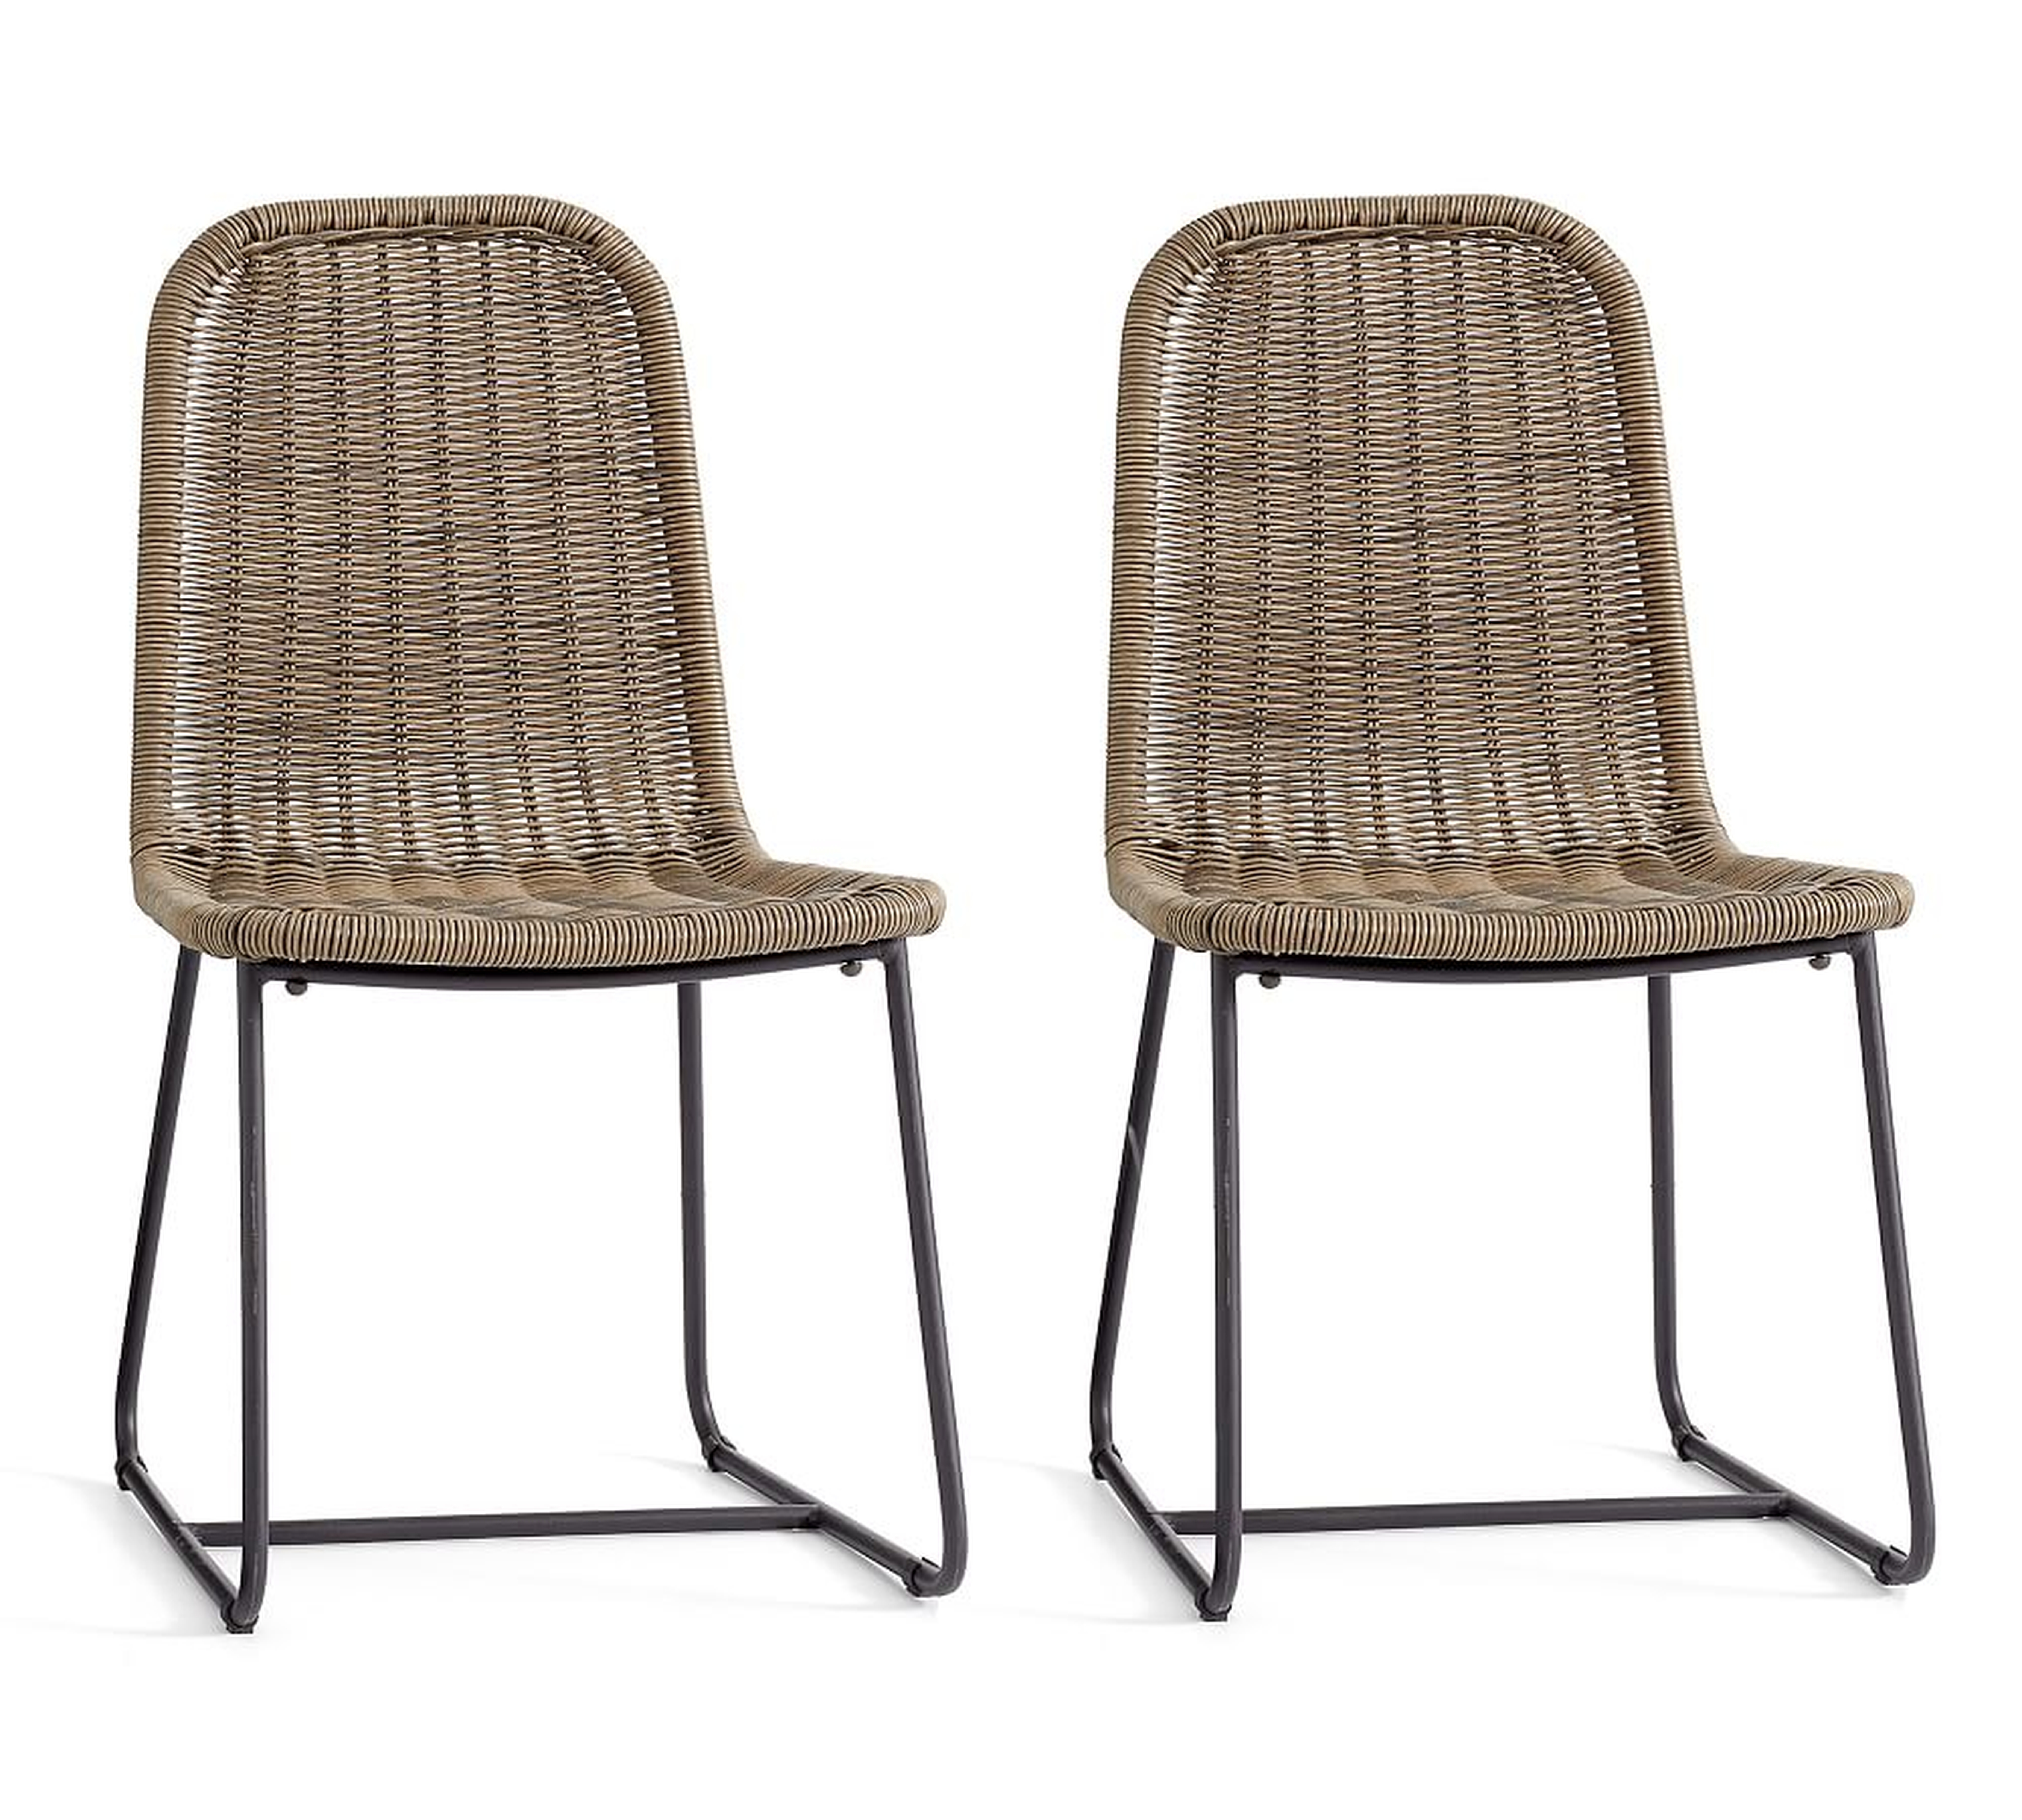 Plymouth Woven Dining Chair, Set of 2 - Pottery Barn